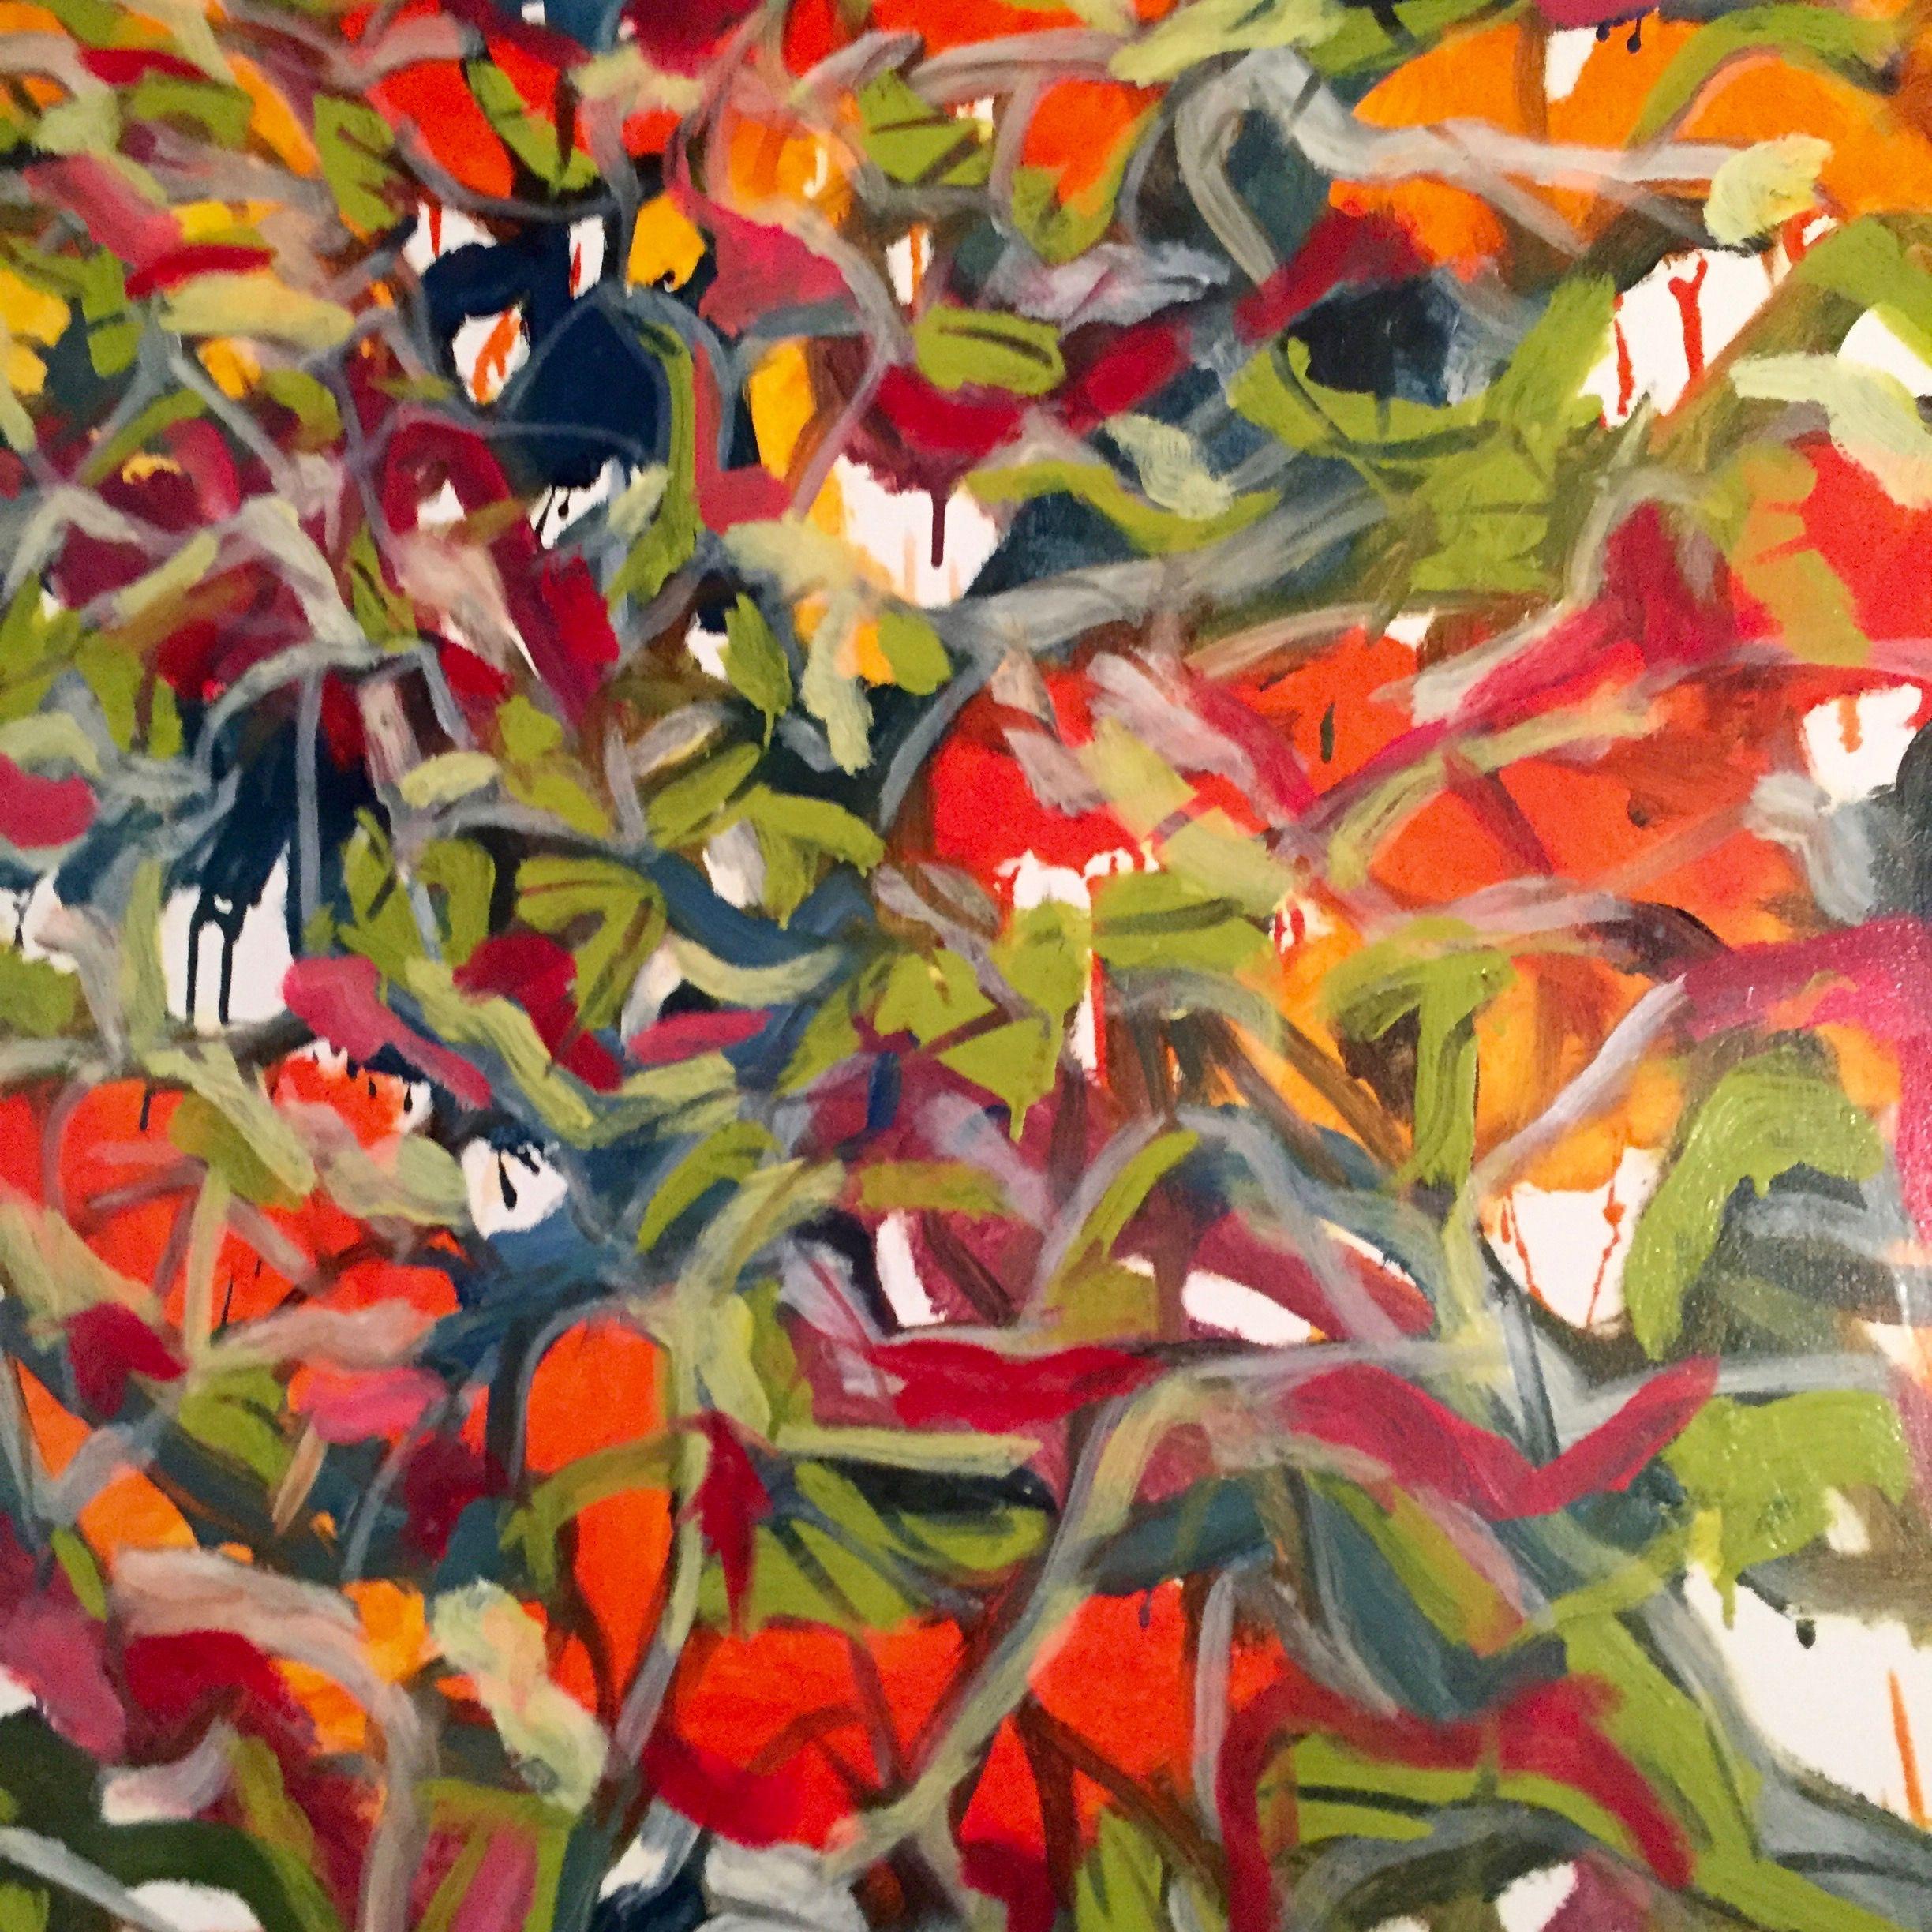 Steven Miller Abstract Painting - I Possess Thousands of Flowers in My Soul, Painting, Oil on Canvas